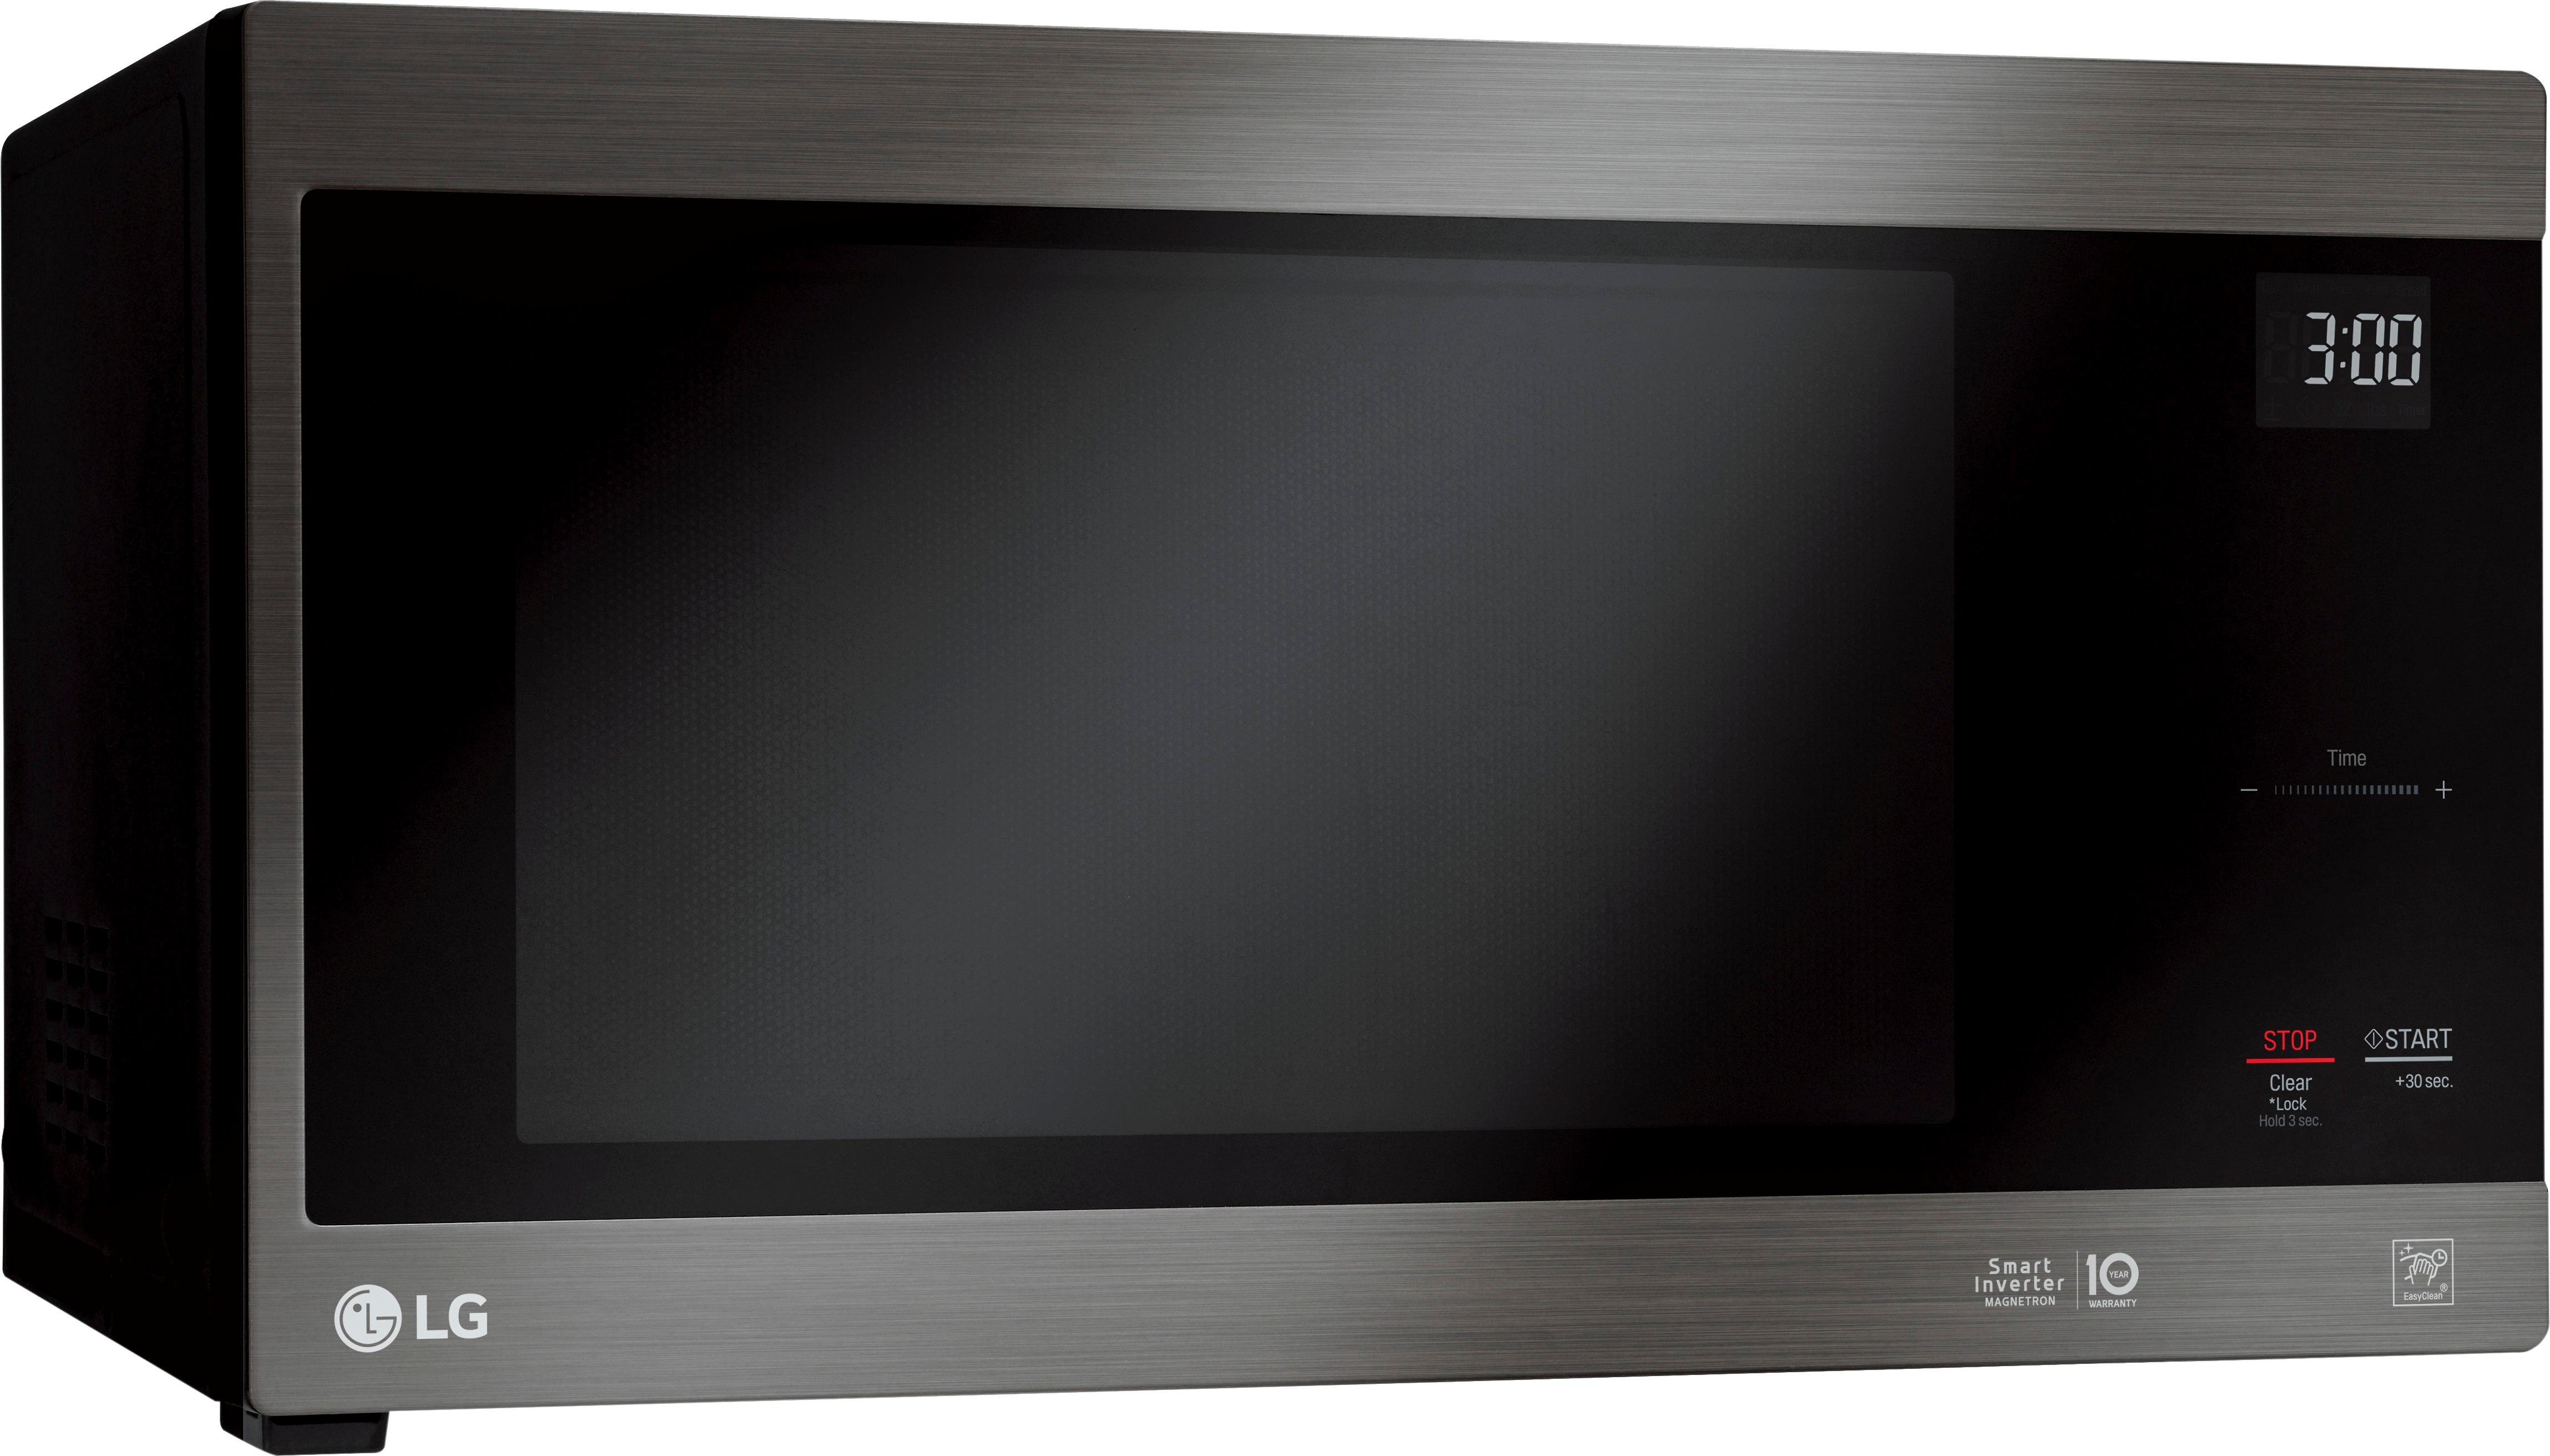 LG NeoChef 1.5 Cu. Ft. Mid-Size Microwave Black stainless steel